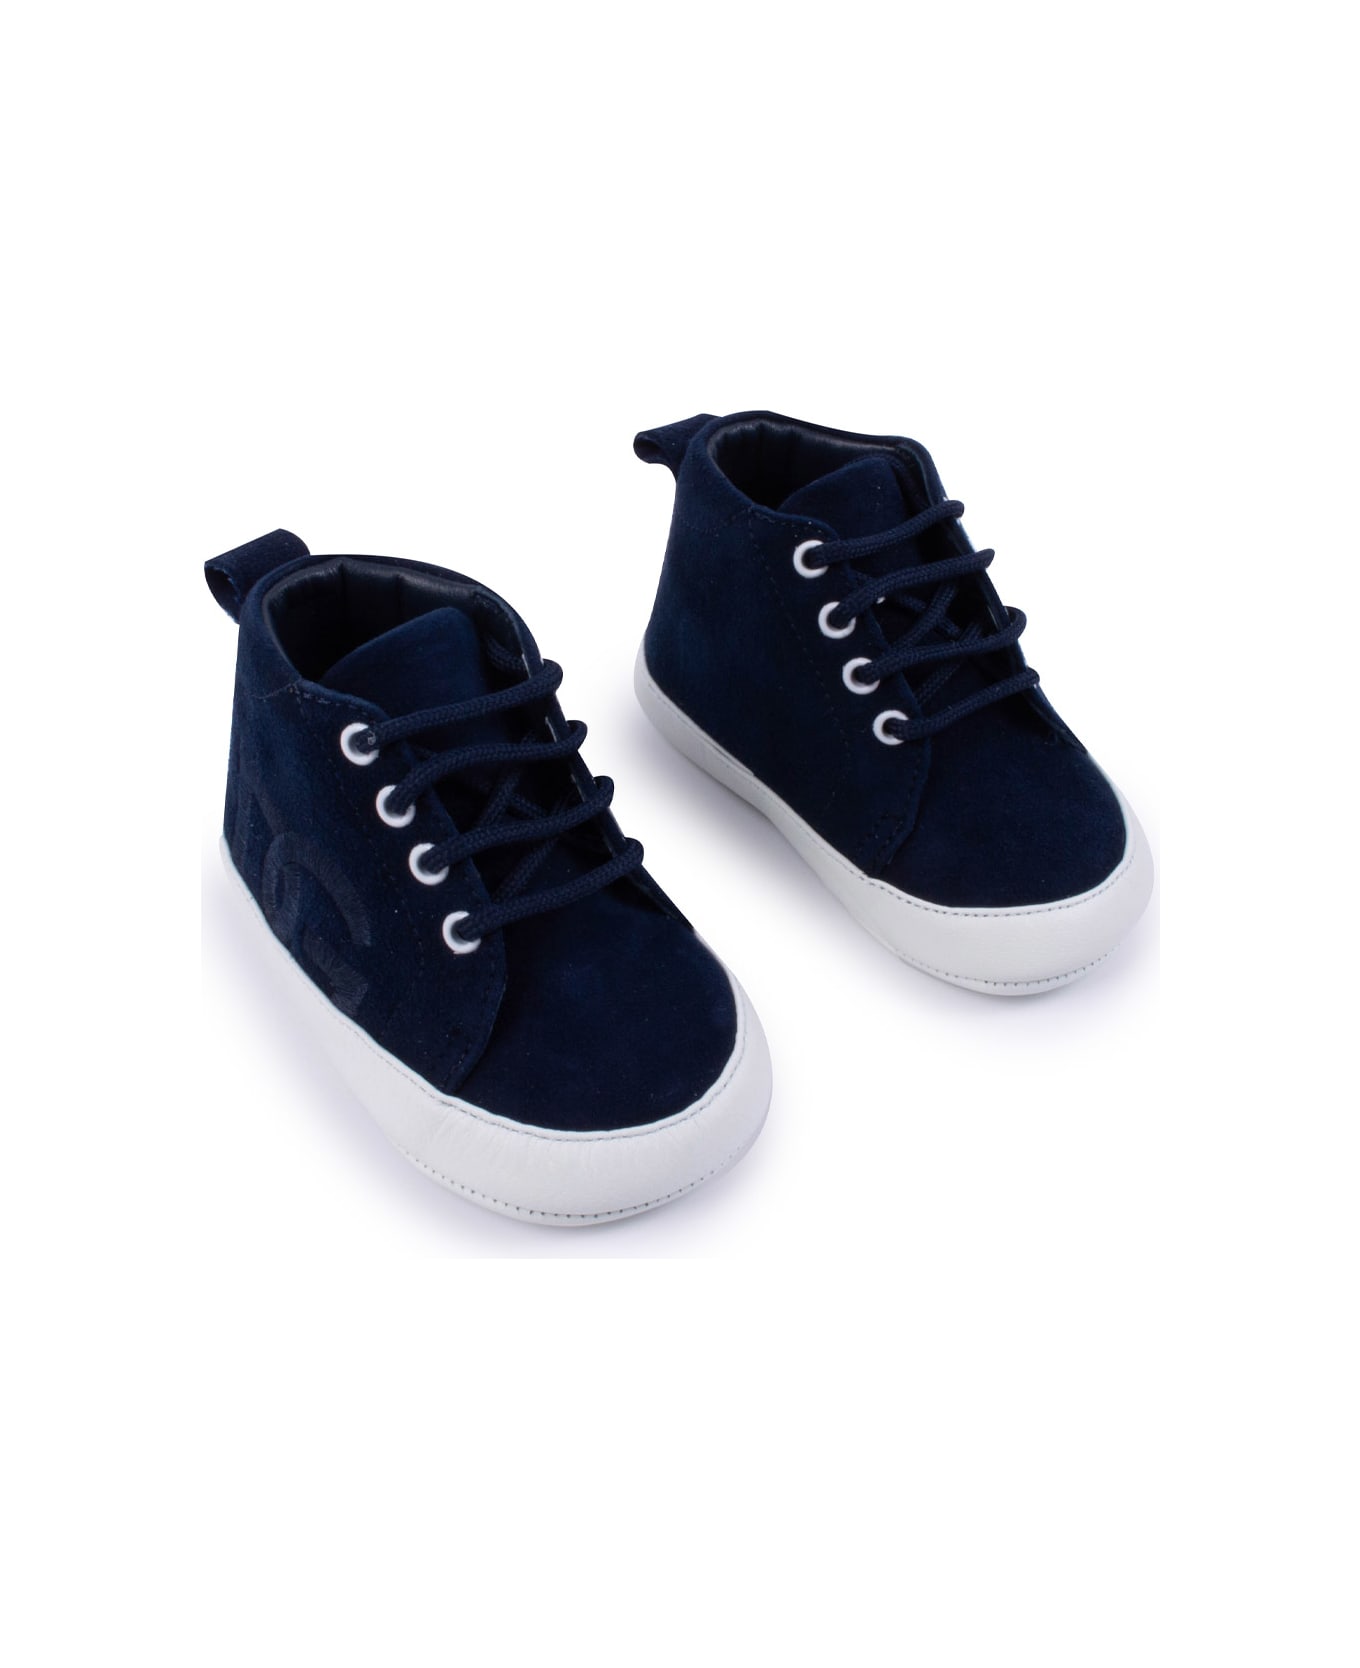 Dolce & Gabbana Suede Sneakers With Dg Logo Embroidery - Blue シューズ